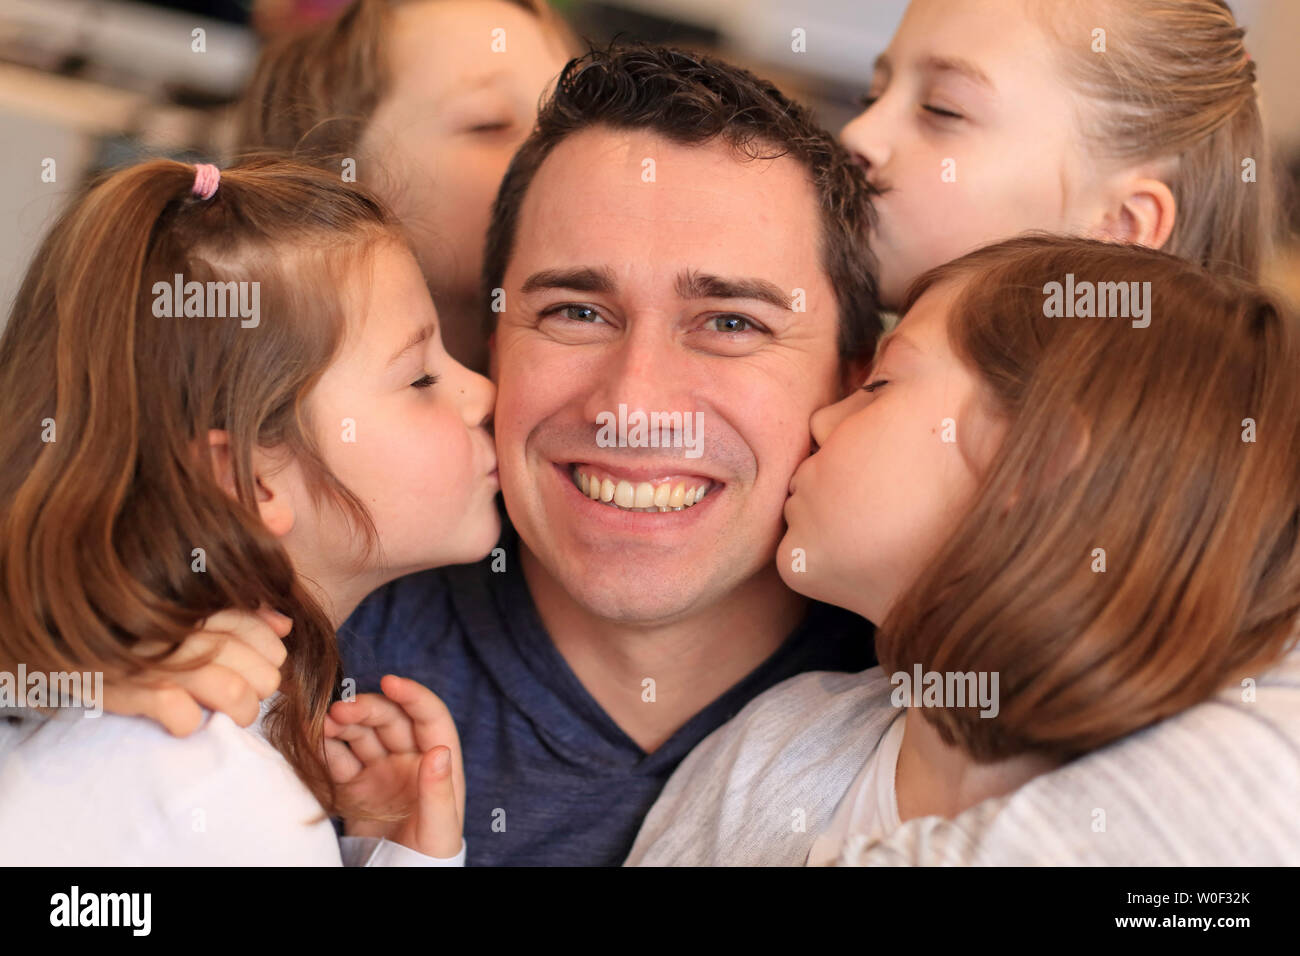 Single father and his children. Stock Photo